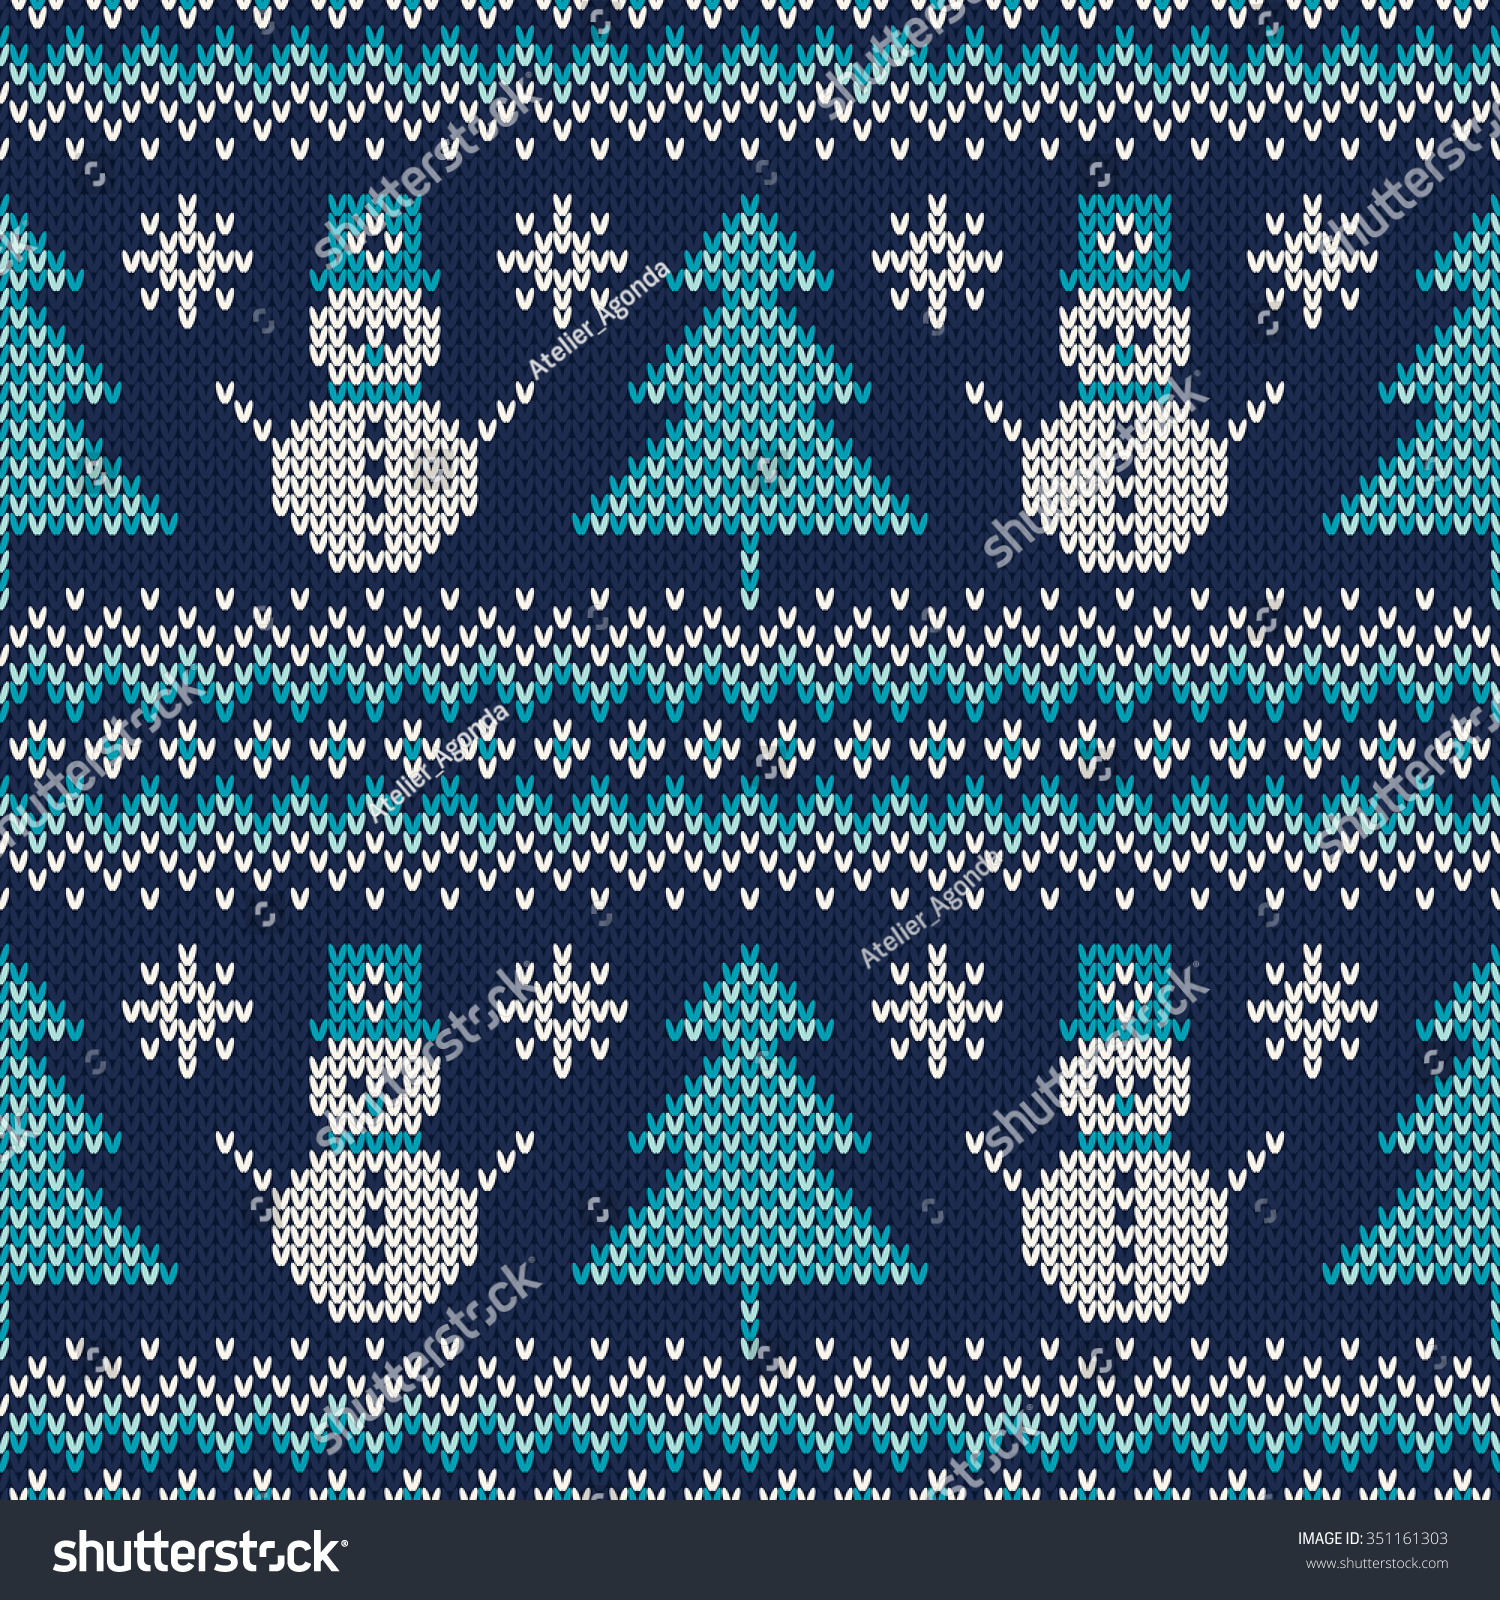 Winter Holiday Sweater Design Seamless Knitted Stock Vector 351161303 ...